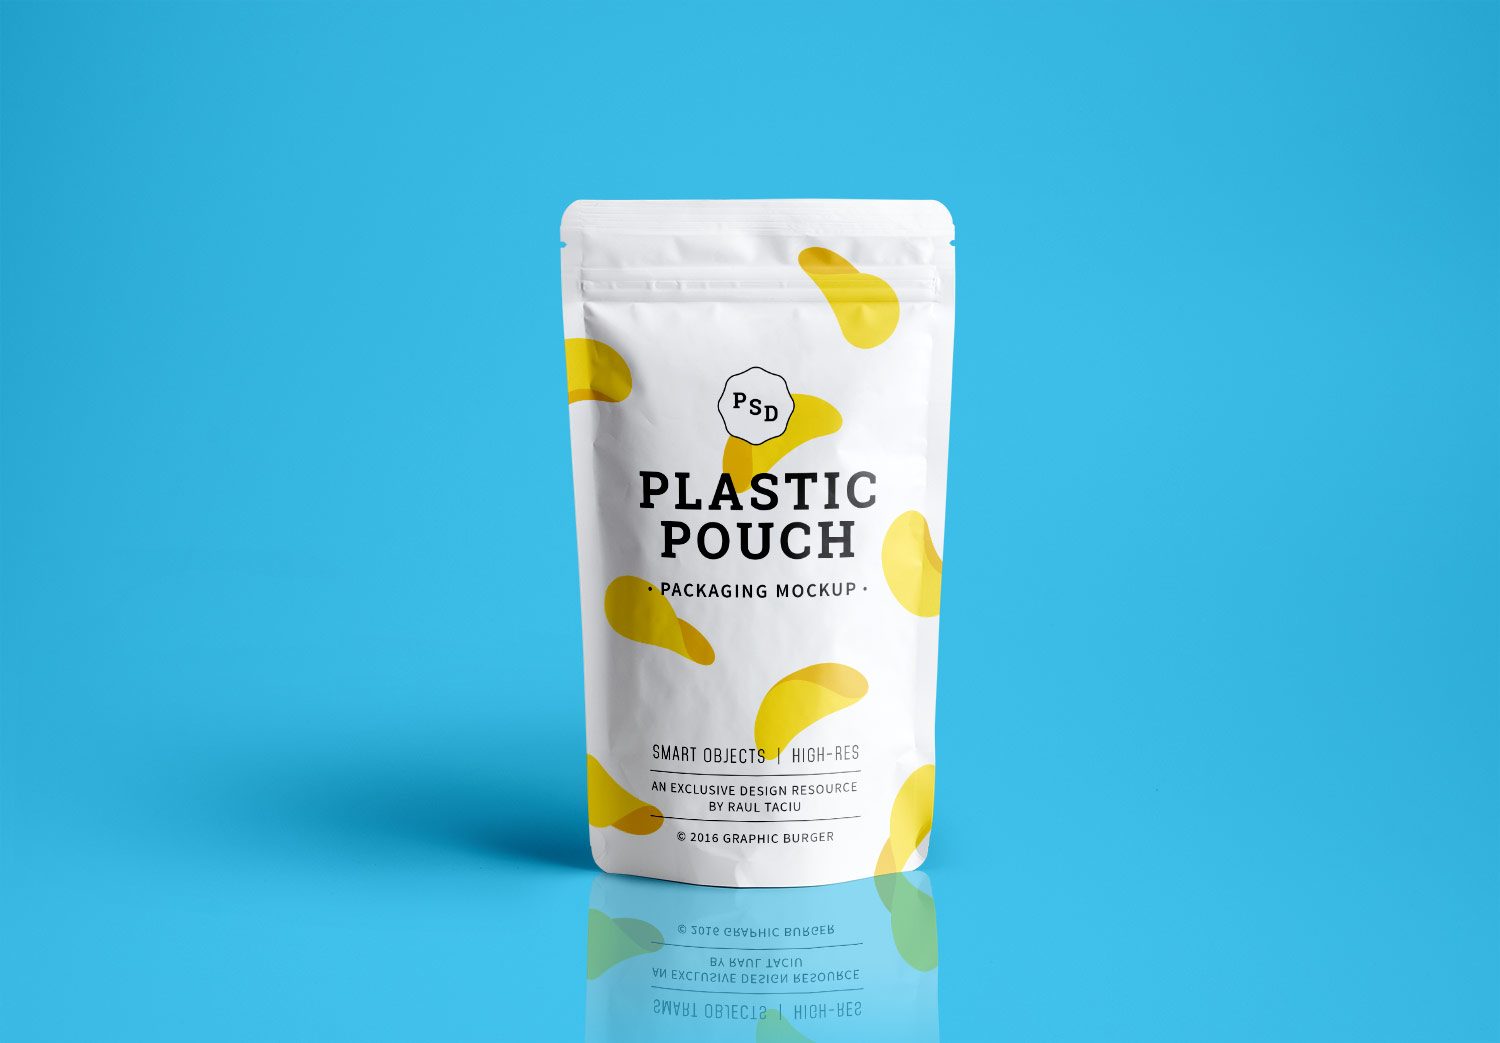 Download Plastic Pouch Packaging Mockup Best Free Mockups PSD Mockup Templates